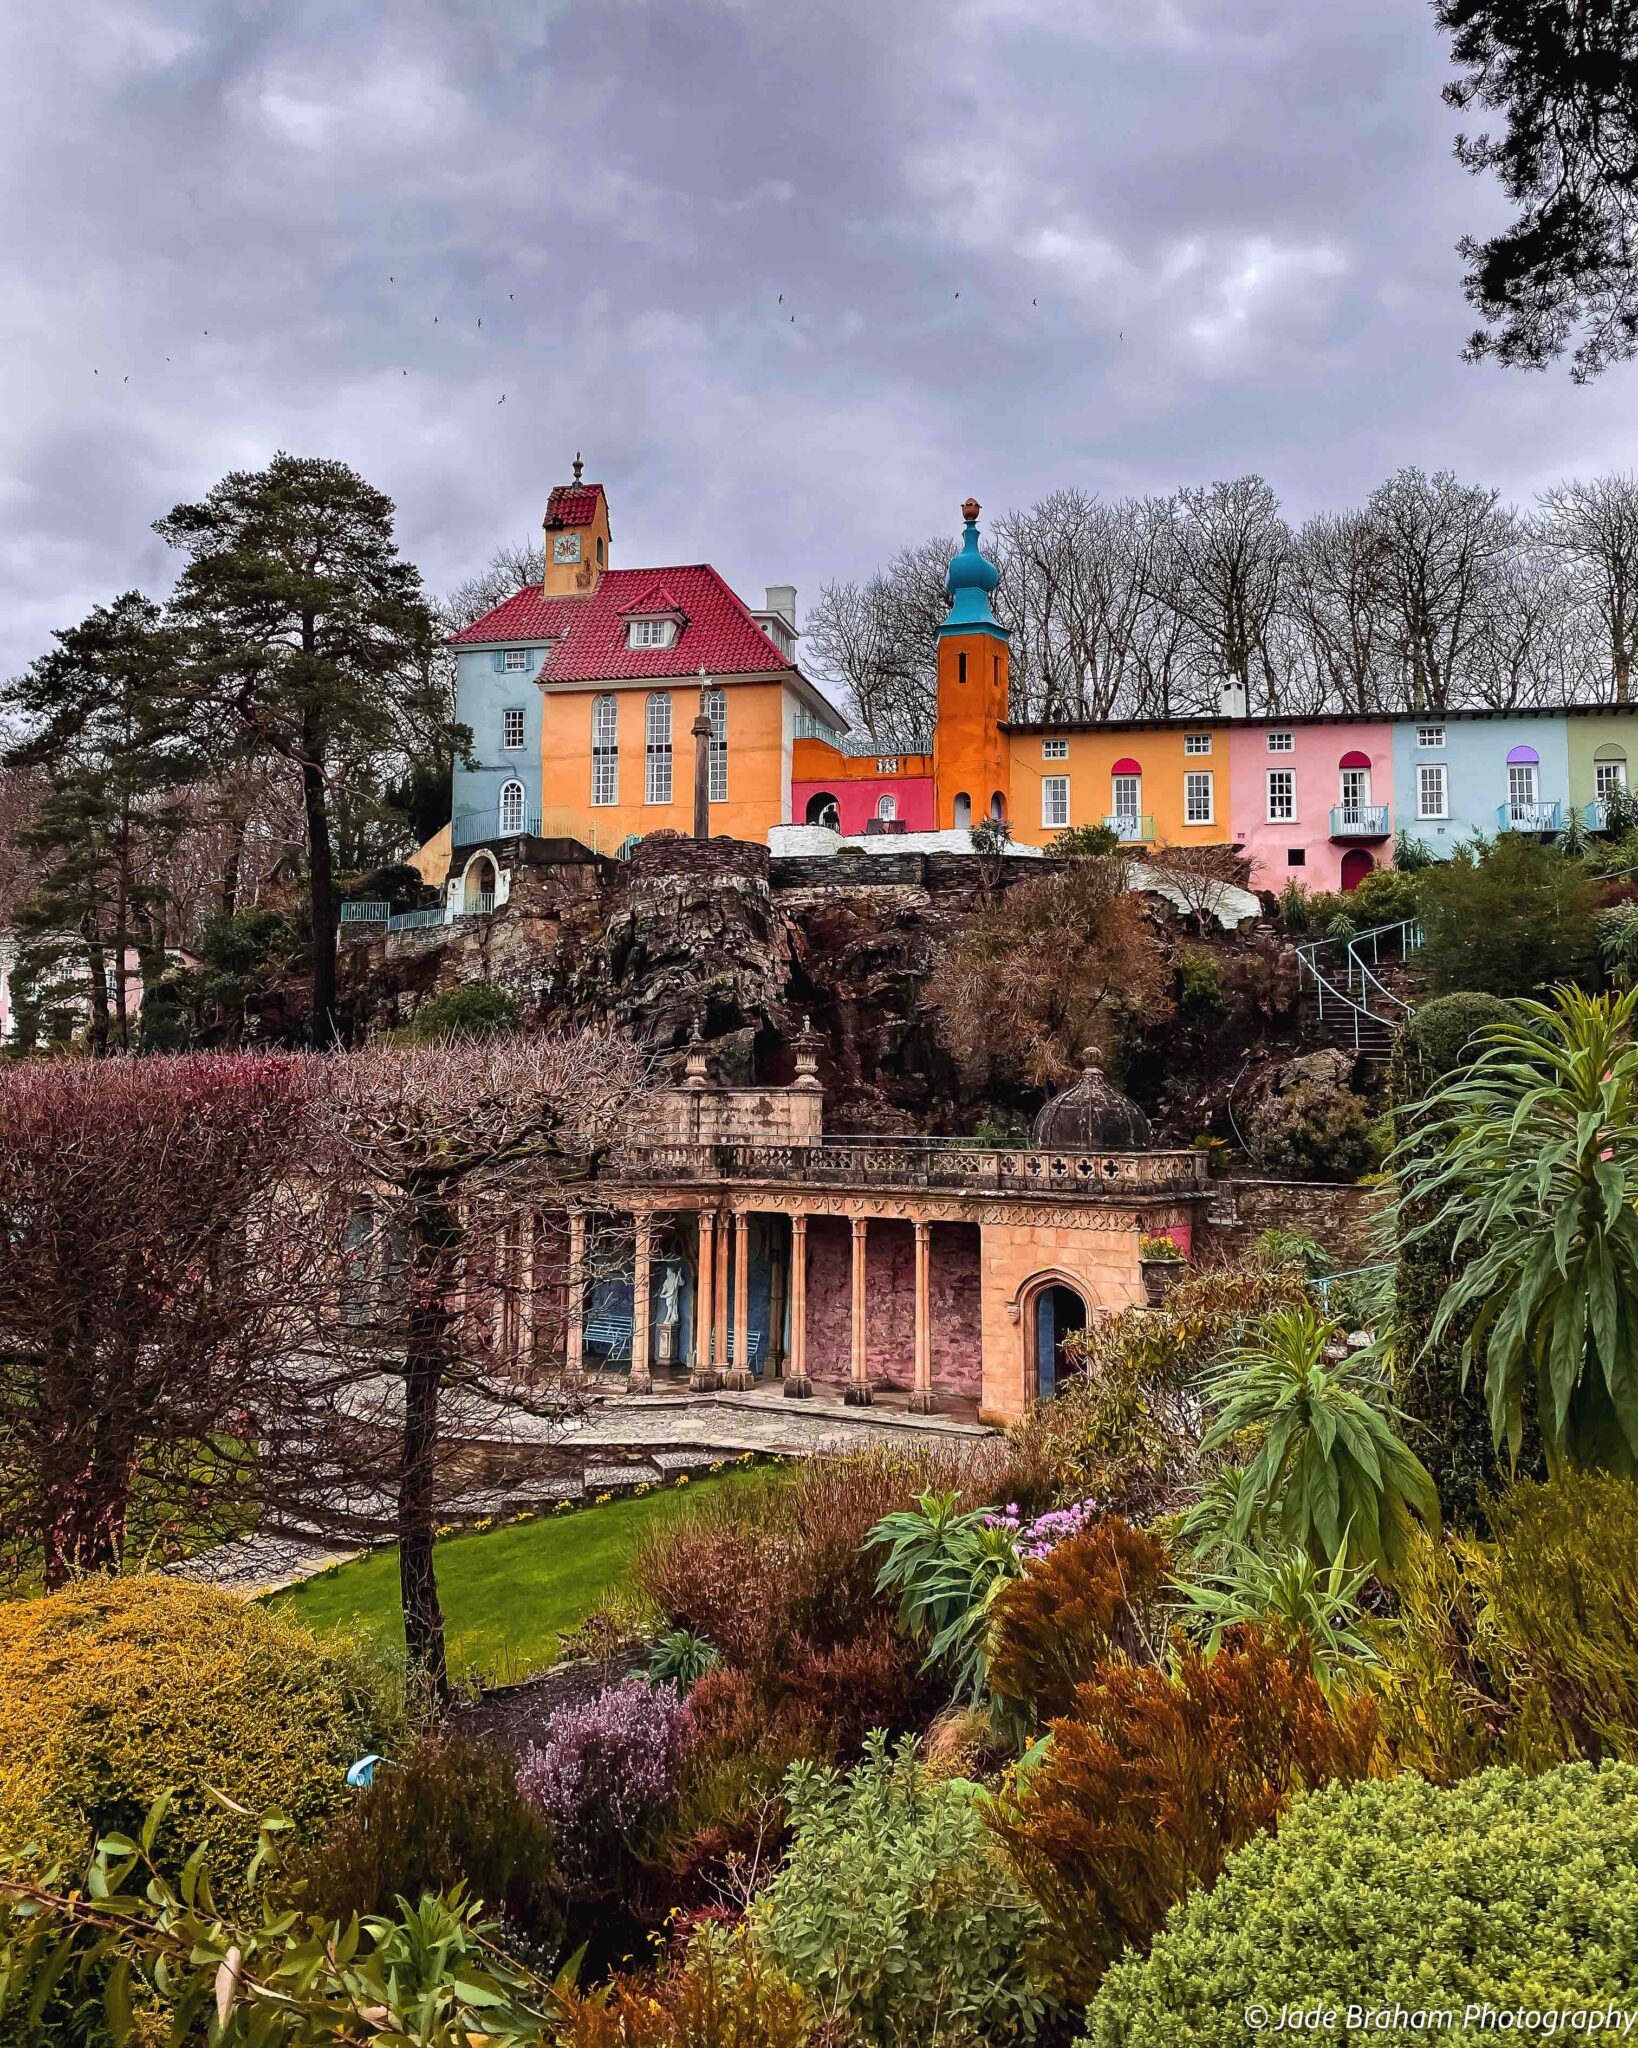 Portmeirion is a colourful place with Italian-style buildings.